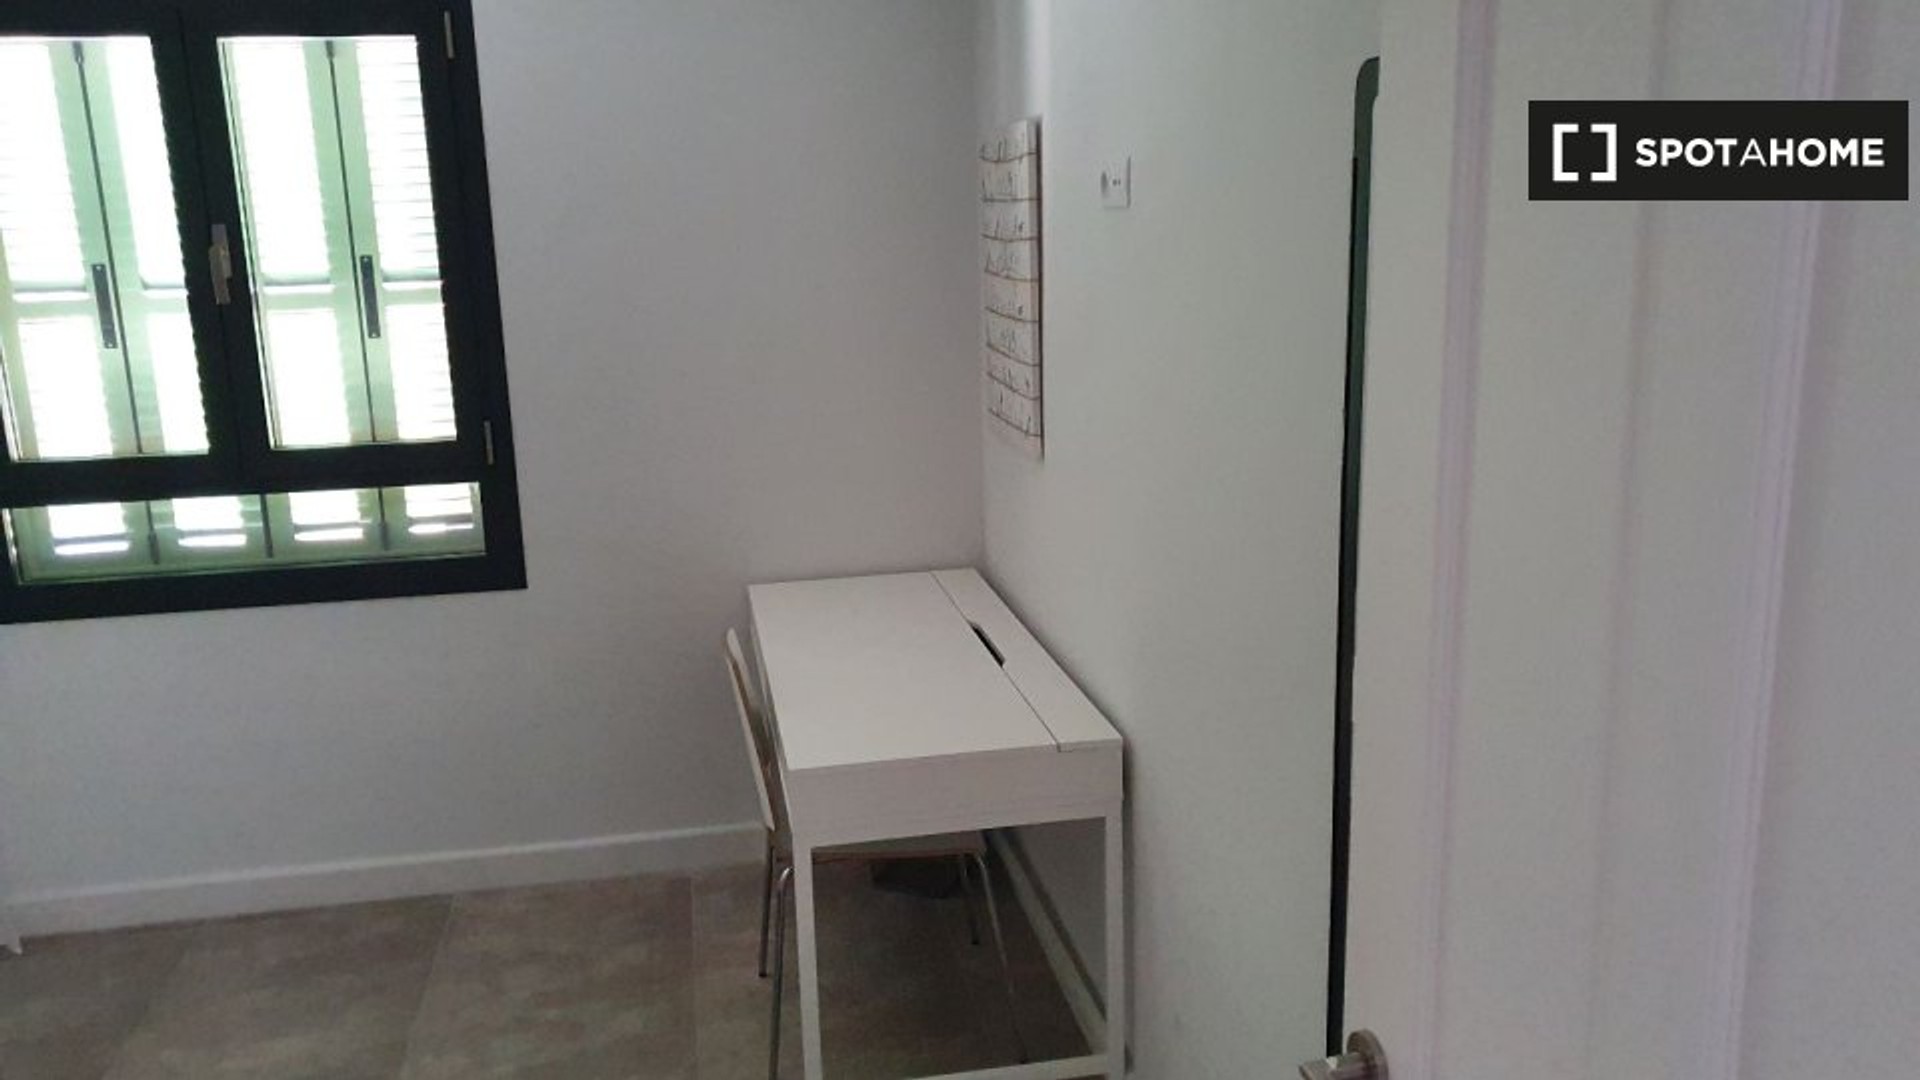 Room for rent in a shared flat in Palma De Mallorca